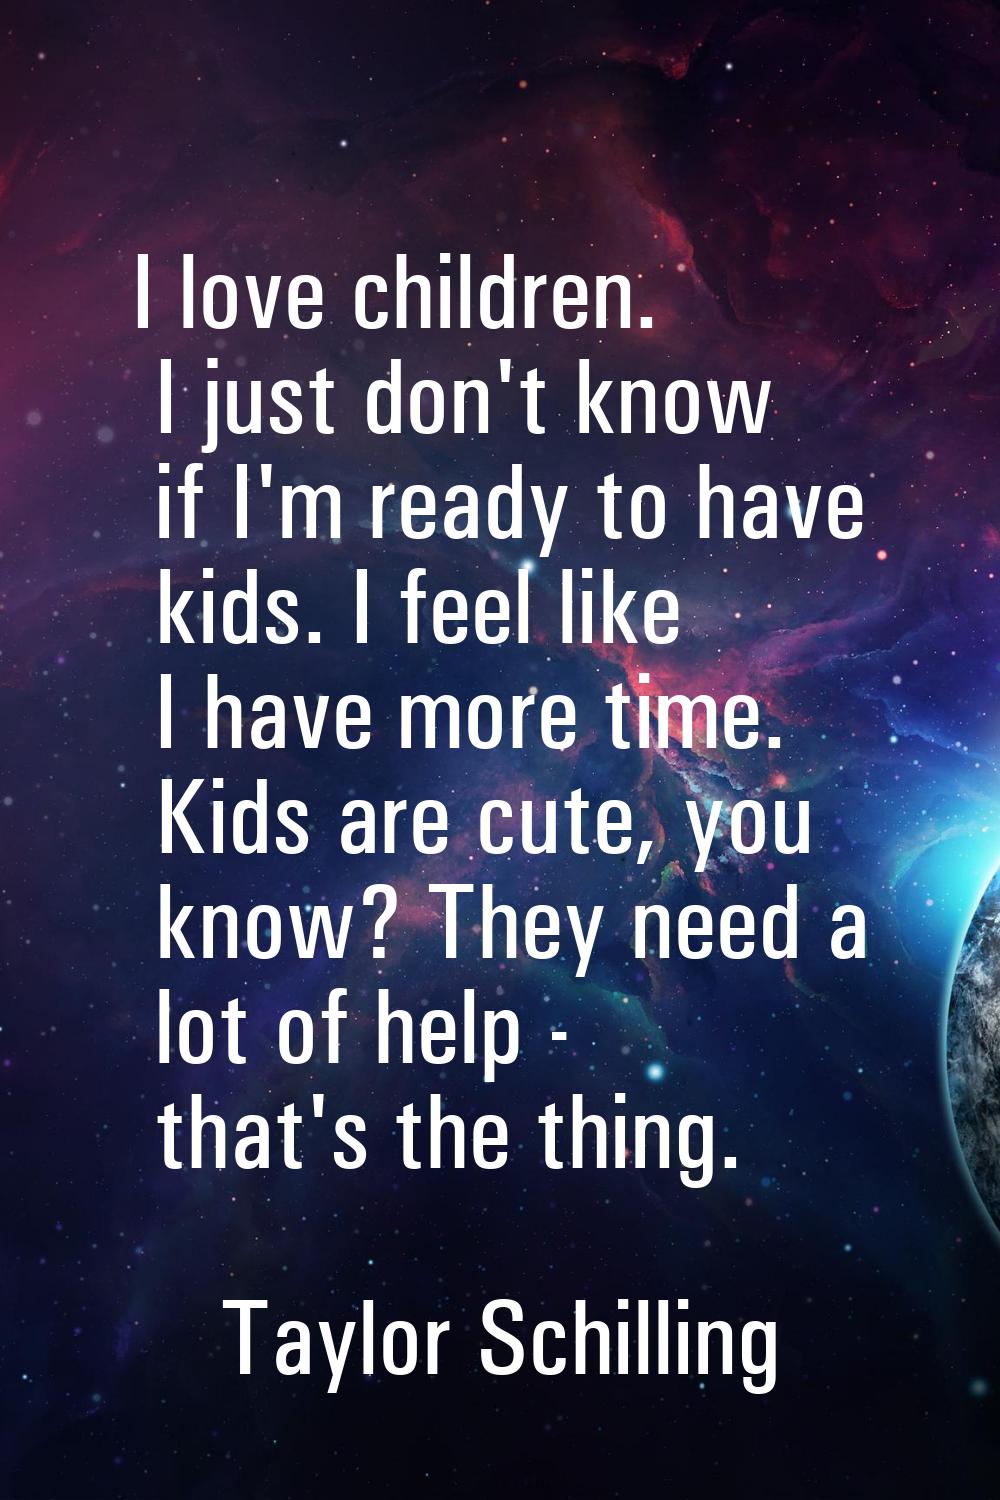 I love children. I just don't know if I'm ready to have kids. I feel like I have more time. Kids ar